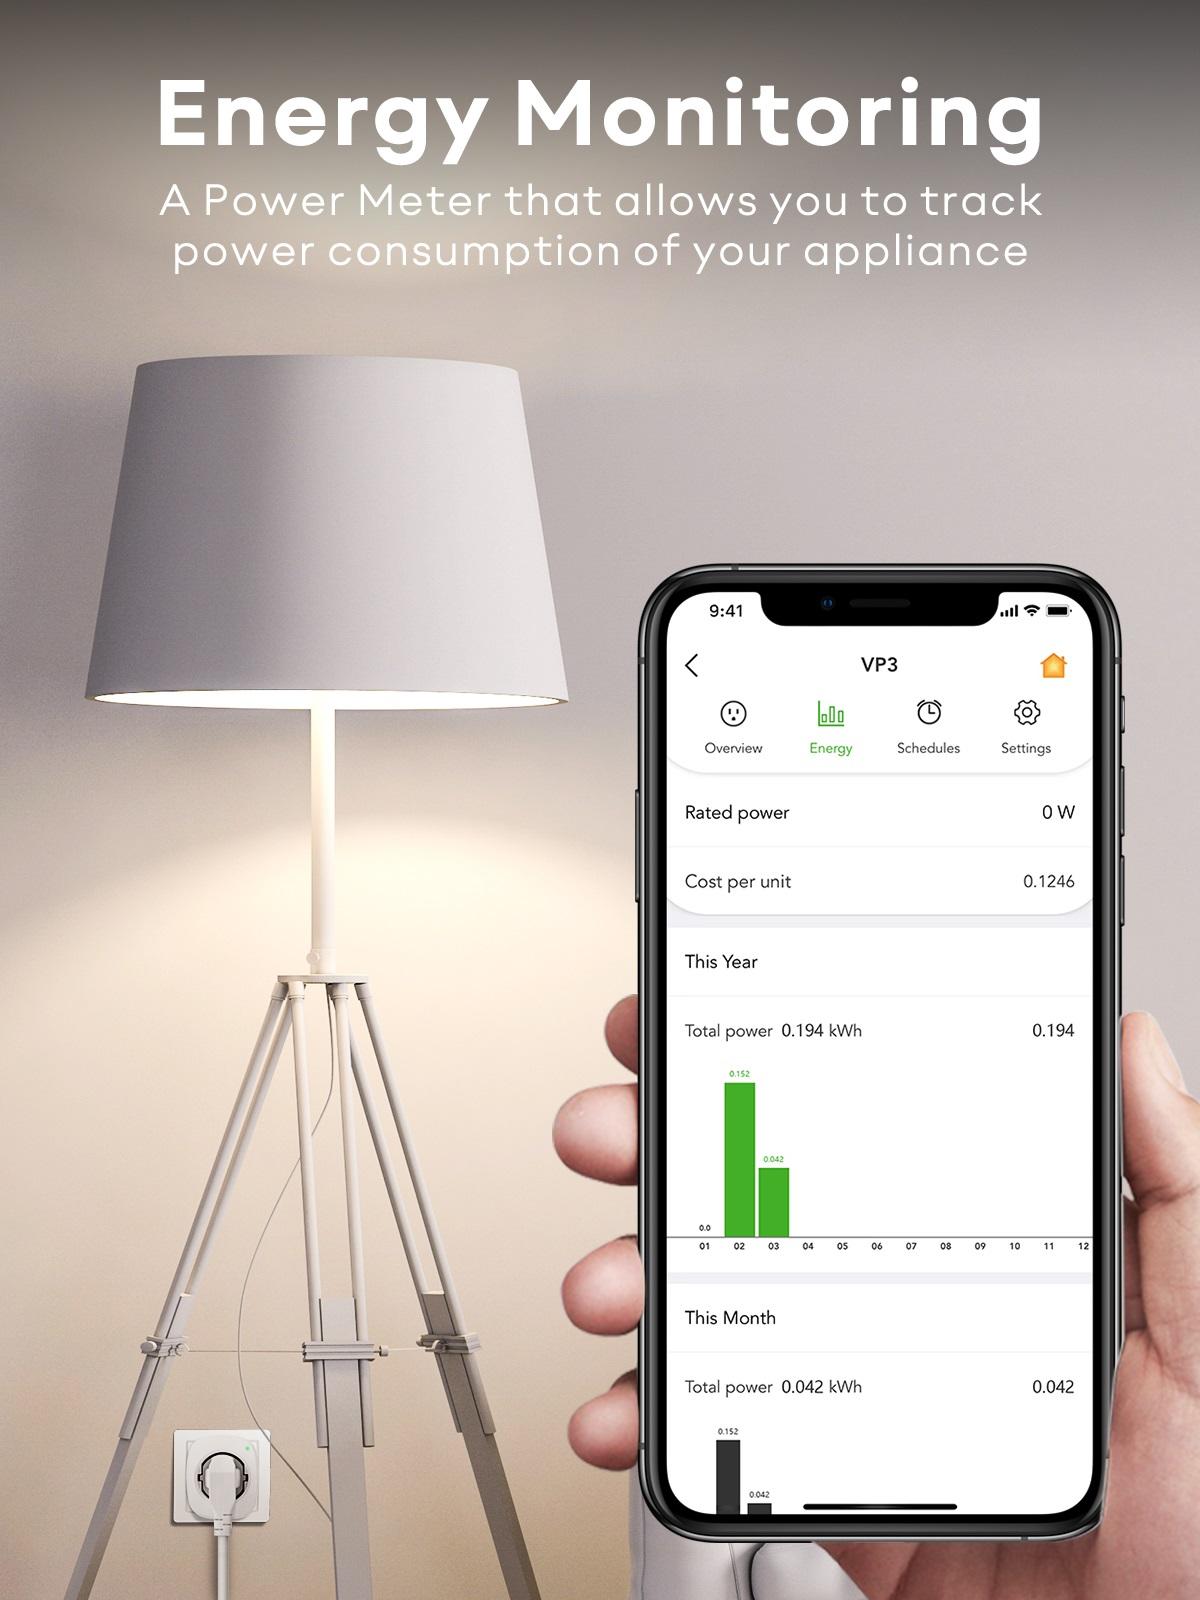 【Energy monitoring】: VOCOlinc VP3 smart WiFi socket with power monitor can monitor the consumption of connected devices, and you can see the power consumption of your devices at any time in the app.